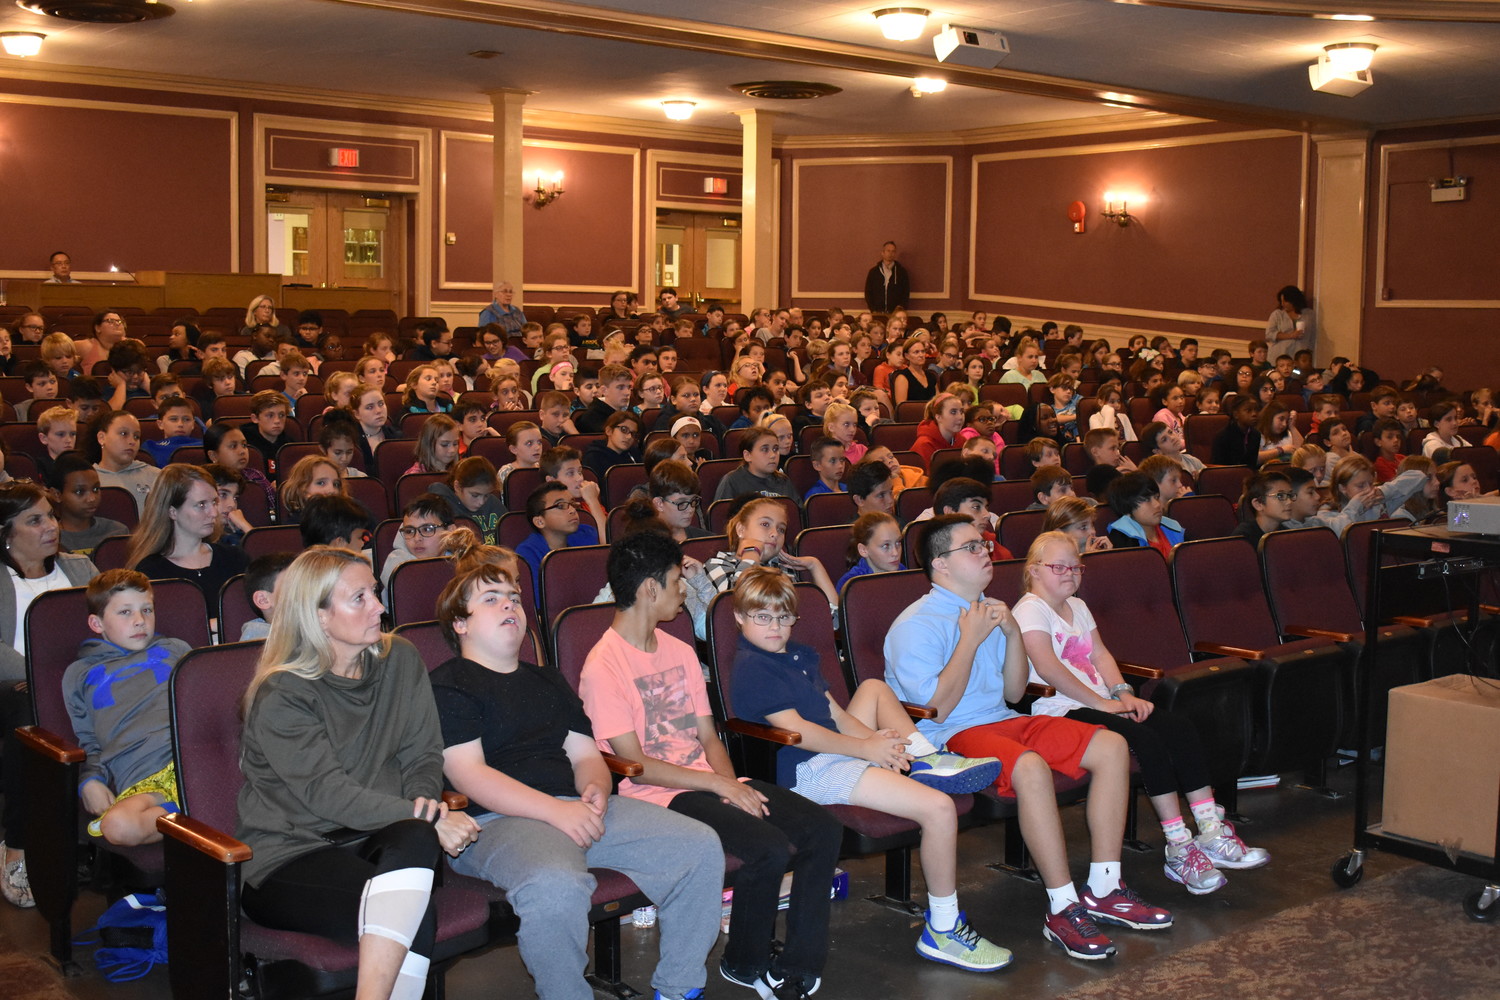 Sixth- and seventh-graders packed the South Side Middle School auditorium.